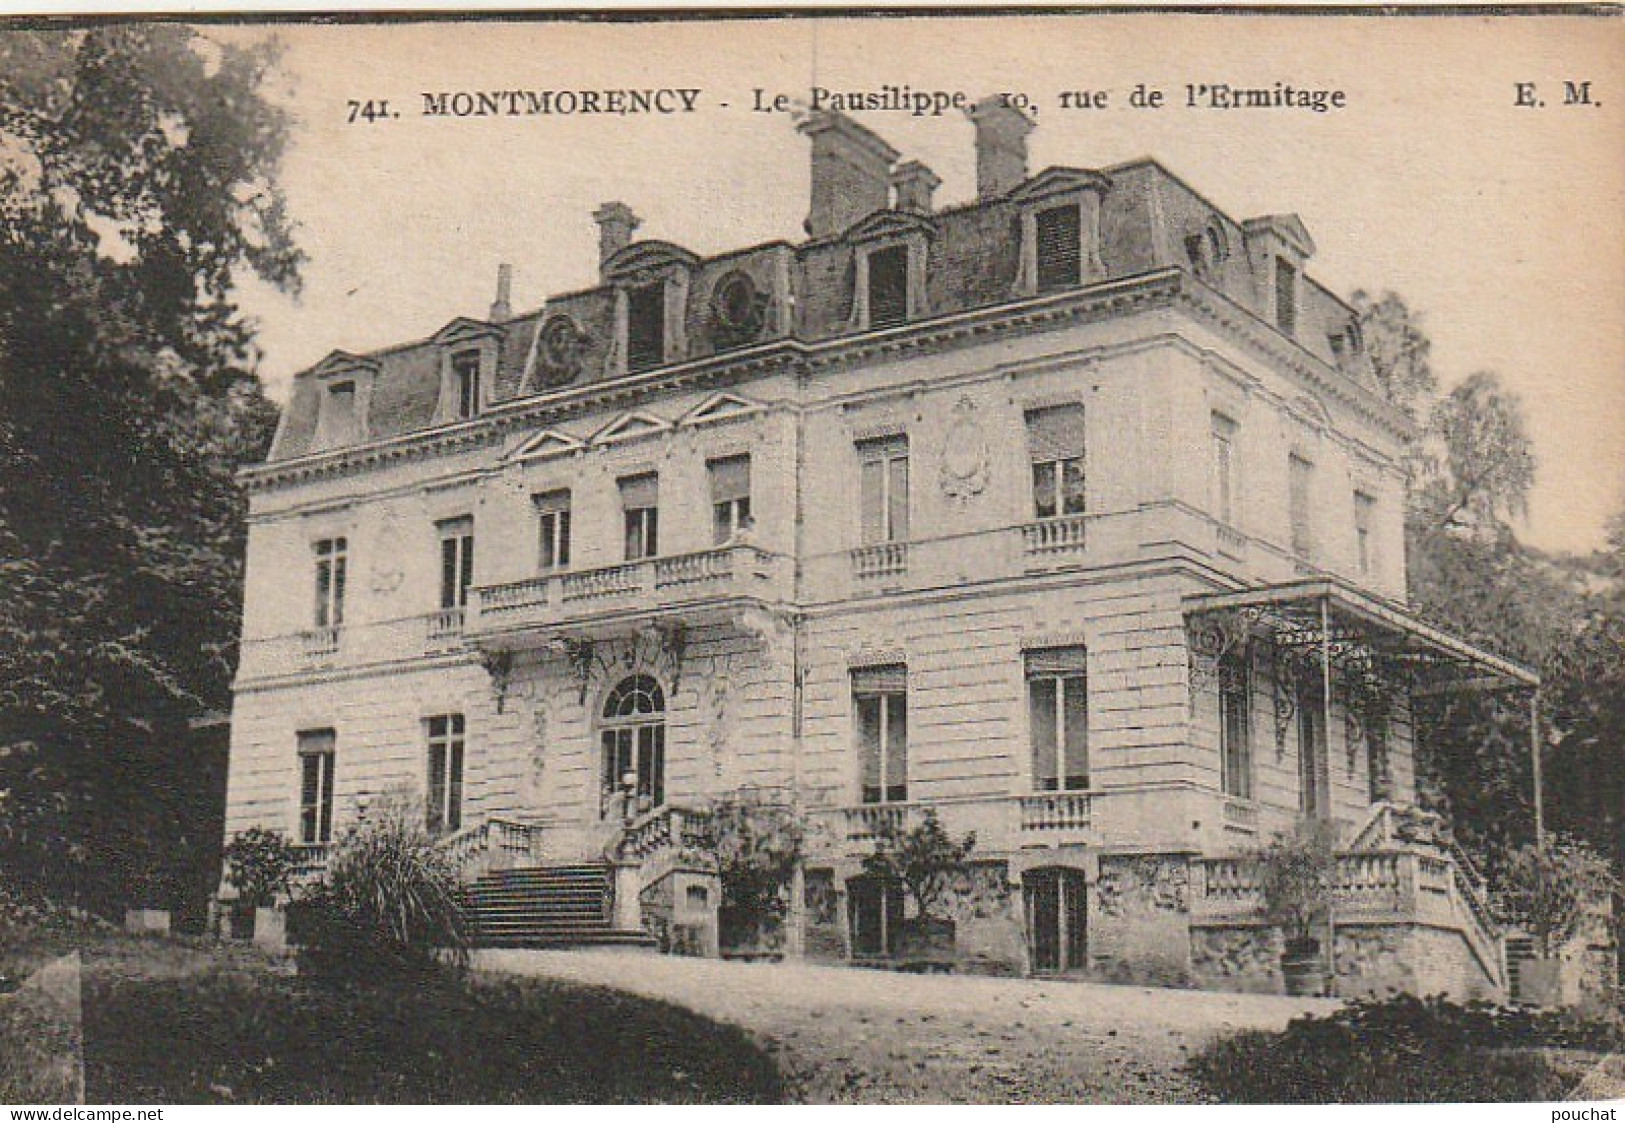 ZY 134-(95) MONTMORENCY - LE PAUSILIPPE - 2 SCANS - Montmorency